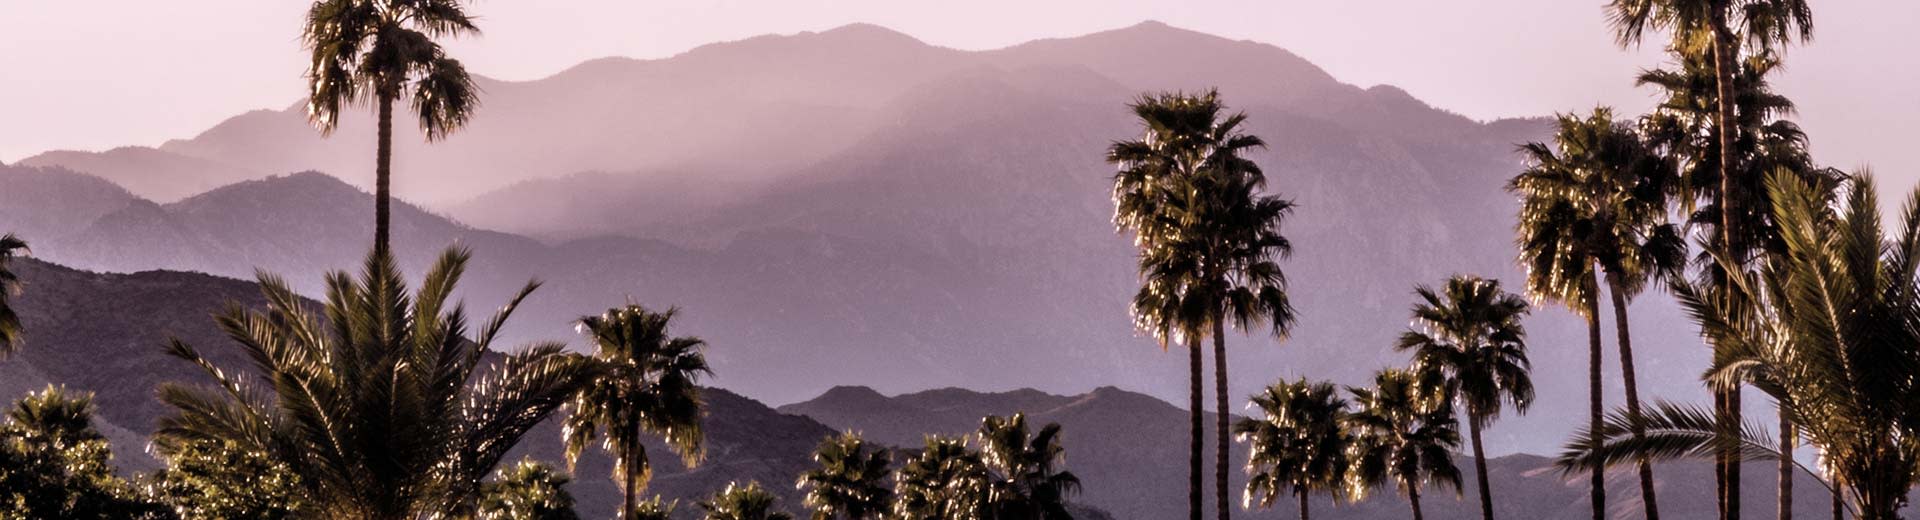 Hills in the background, while palm strees dominate the foreground on a clear and hot day in Palm Springs